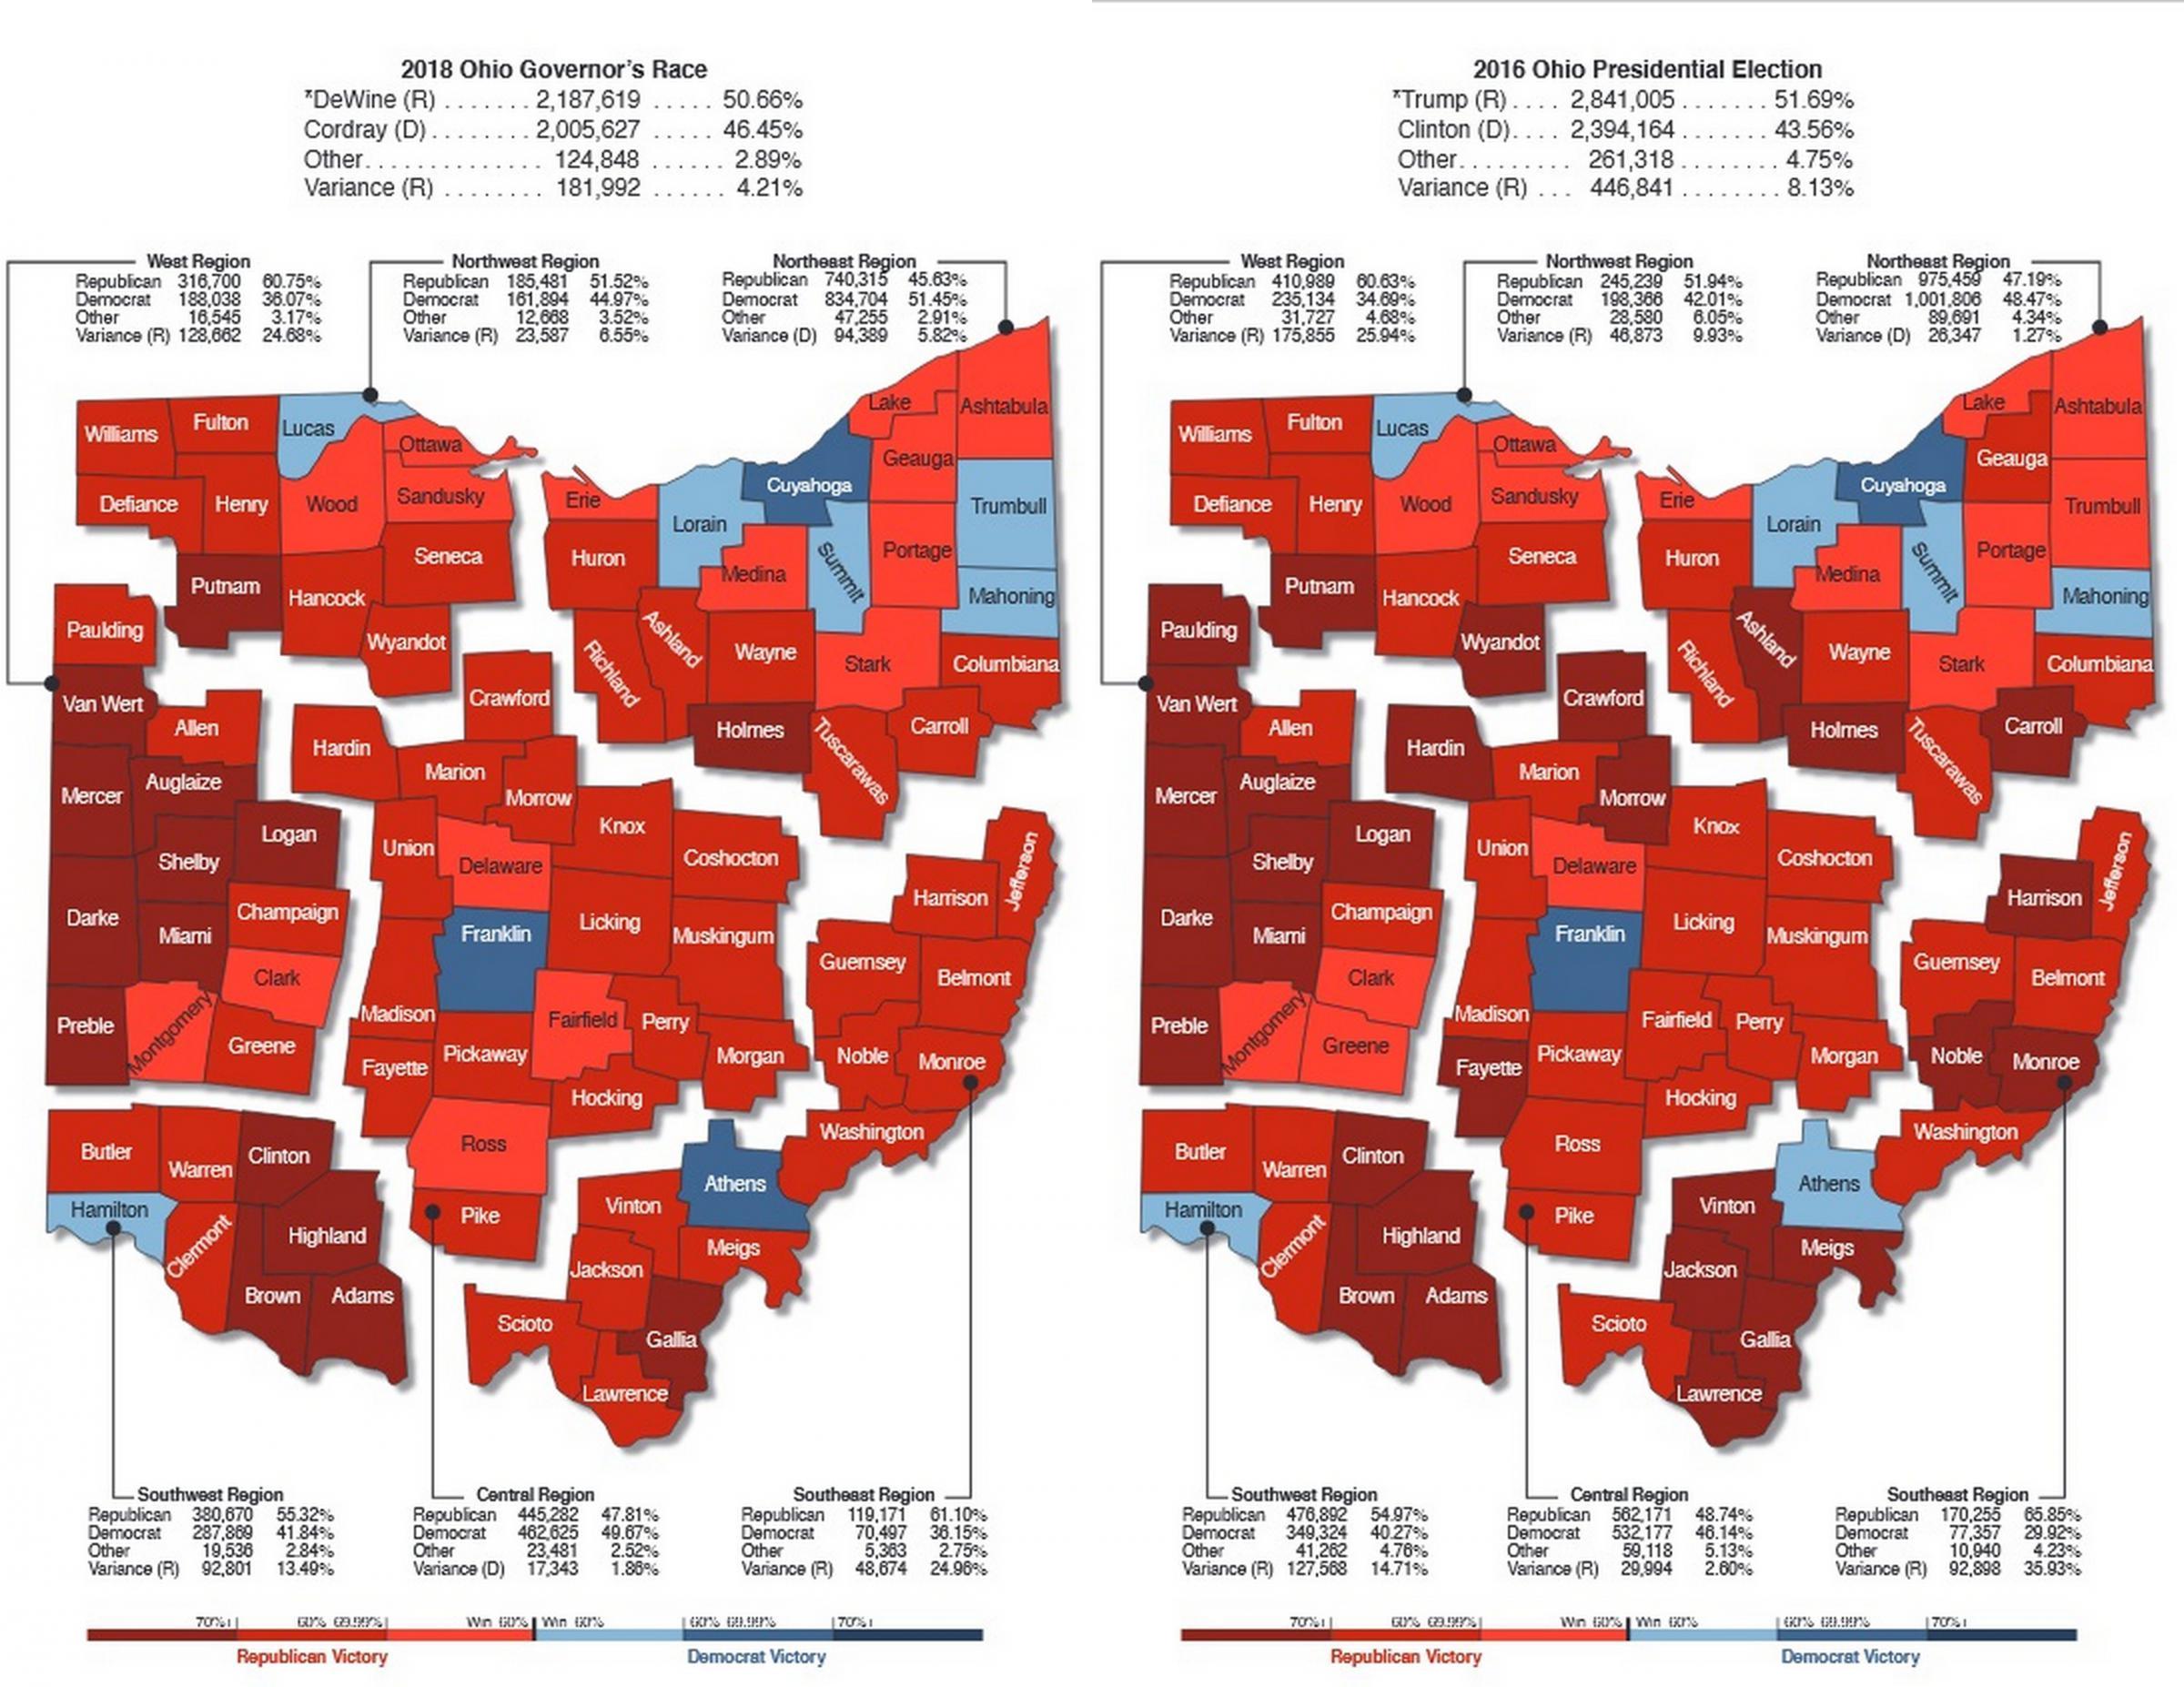 Ohio's 2018 Election Results Look A Lot Like Trump's 2016 Results